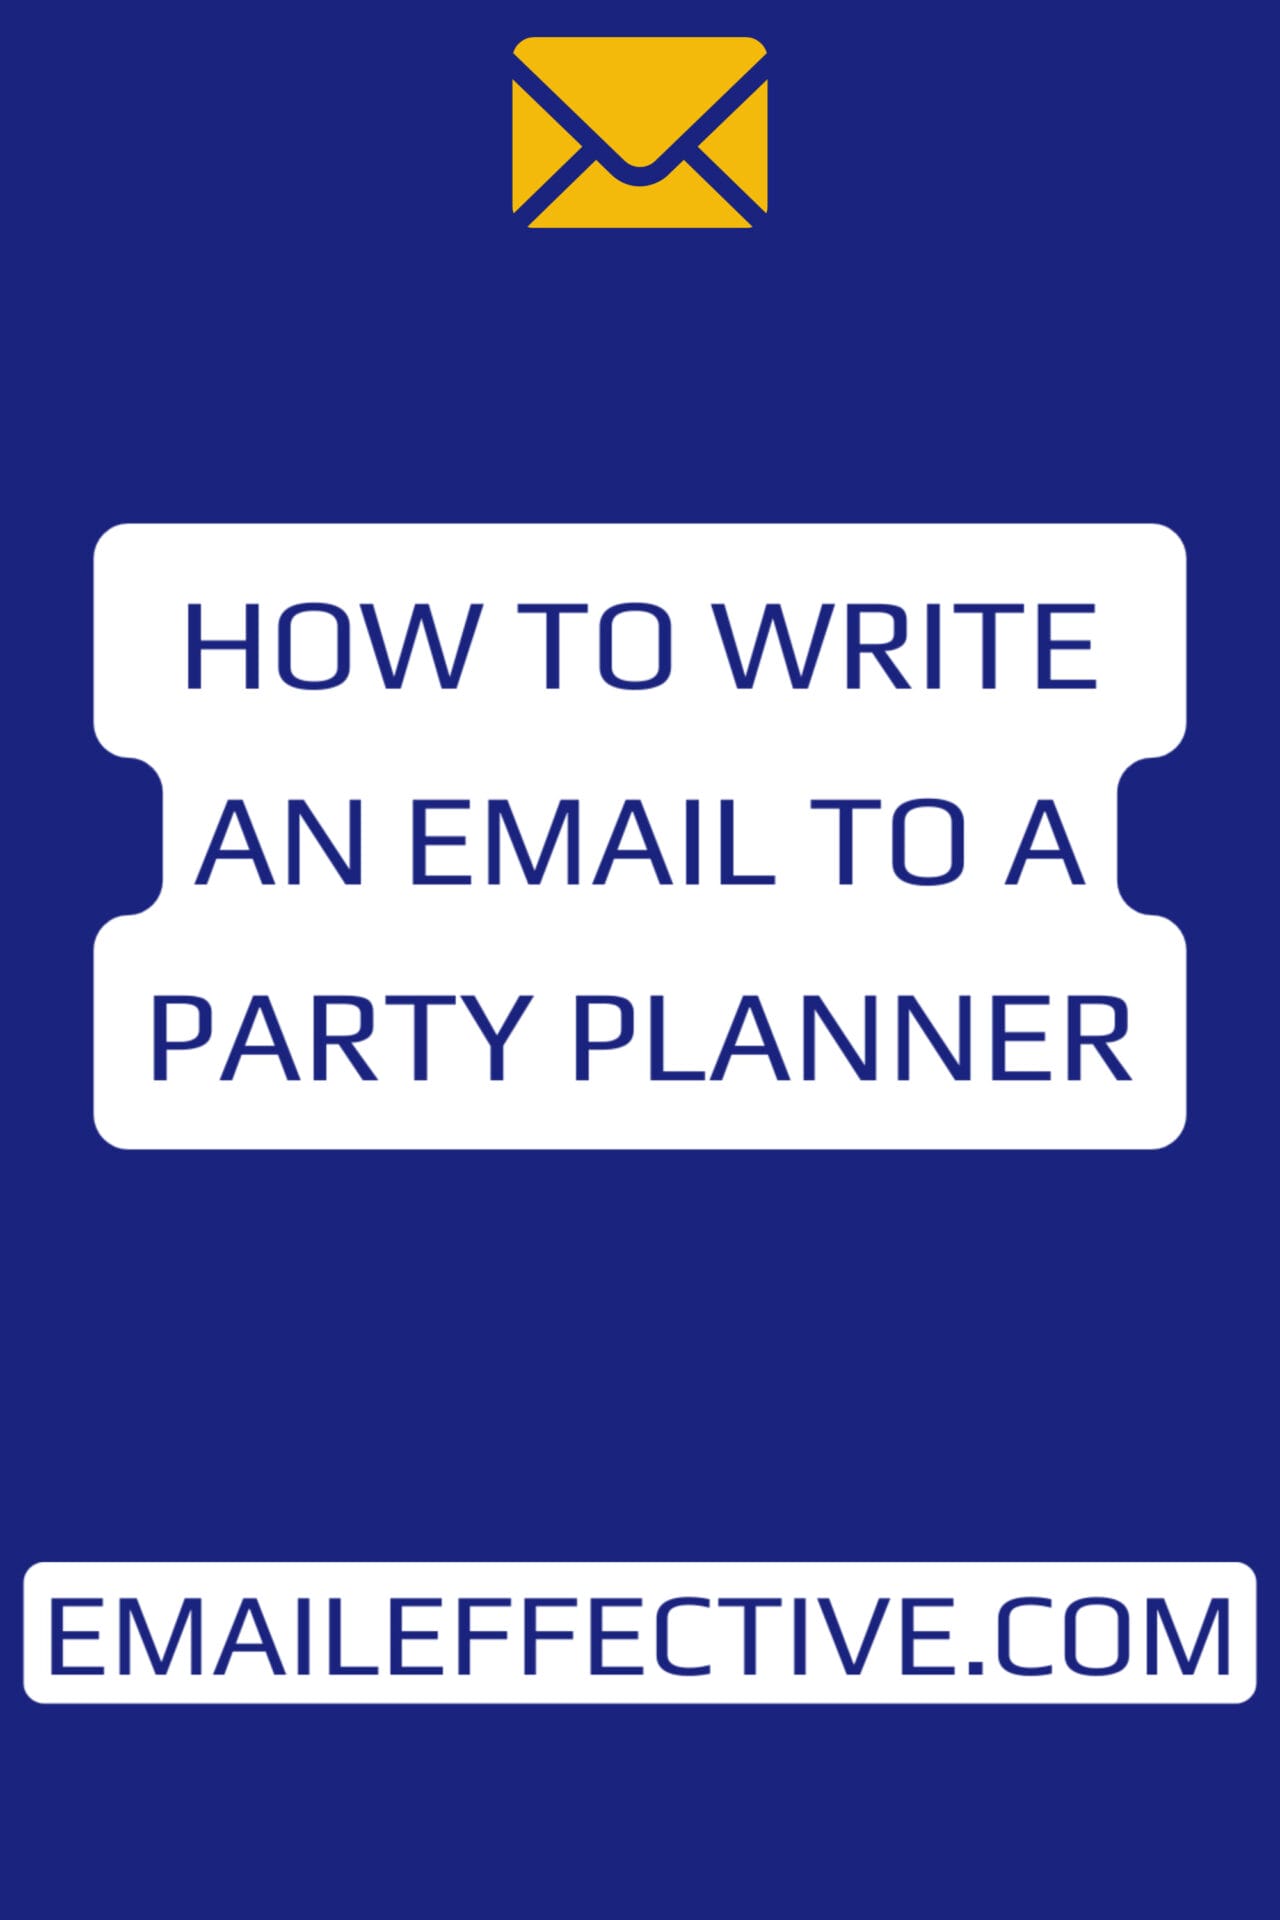 How to Write an Email to a Party Planner